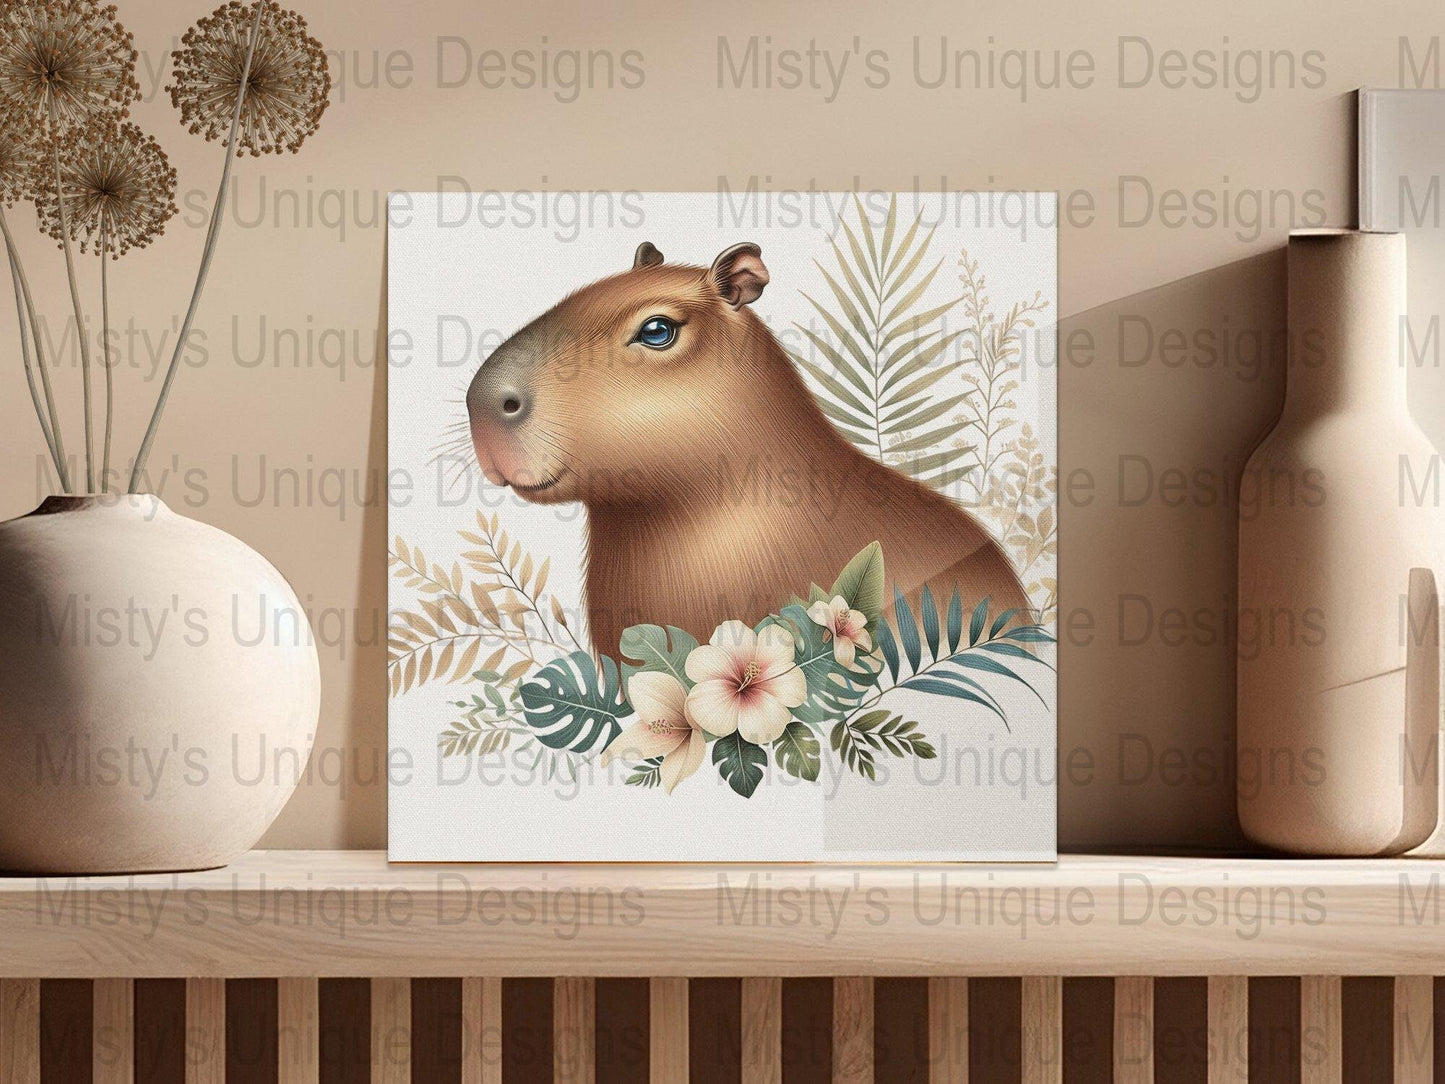 Capybara Clipart PNG, Tropical Leaves and Flowers Digital Download, Cute Rodent Illustration Art, Capybara Lover Gift, Scrapbooking Image